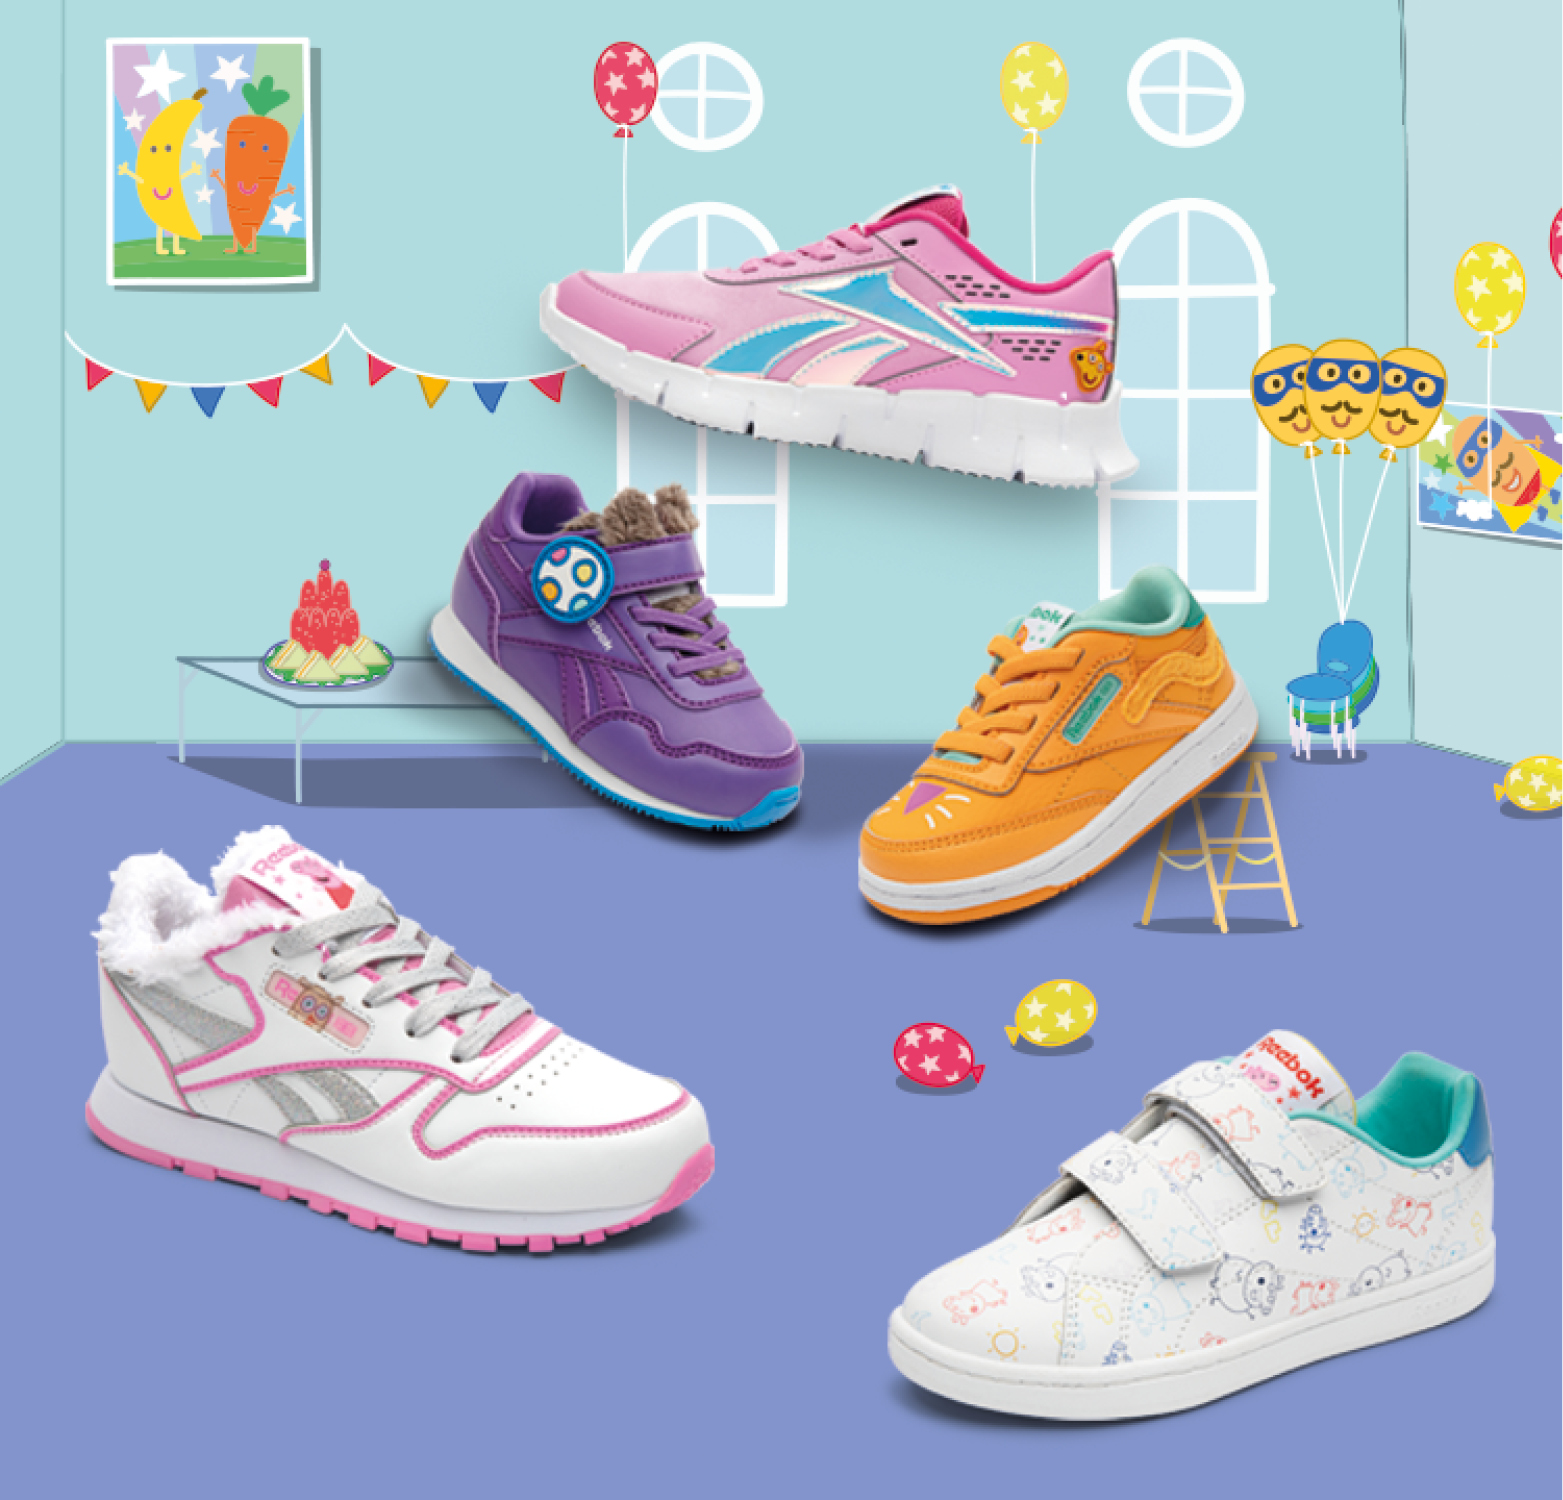 Tradition krog by Reebok announces new Peppa Pig collection - Licensing.biz